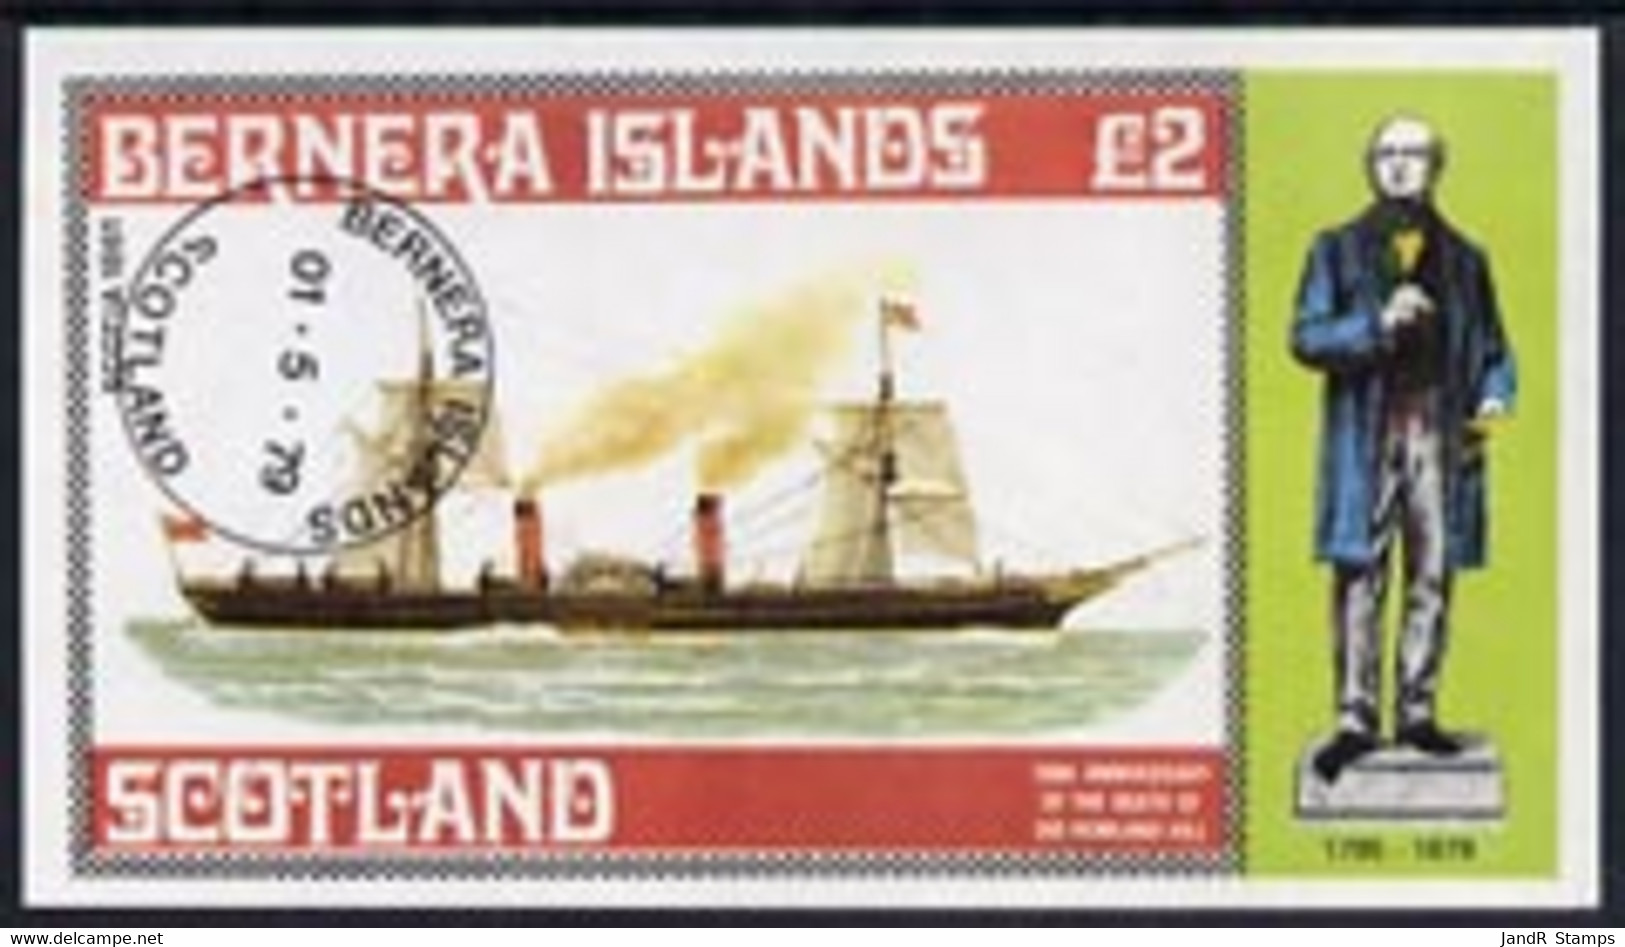 Bernera 1979 Rowland Hill (Ships - Paddle Steamer Scotia) Imperf Deluxe Sheet (�2 Value) Cto Used - Local Issues